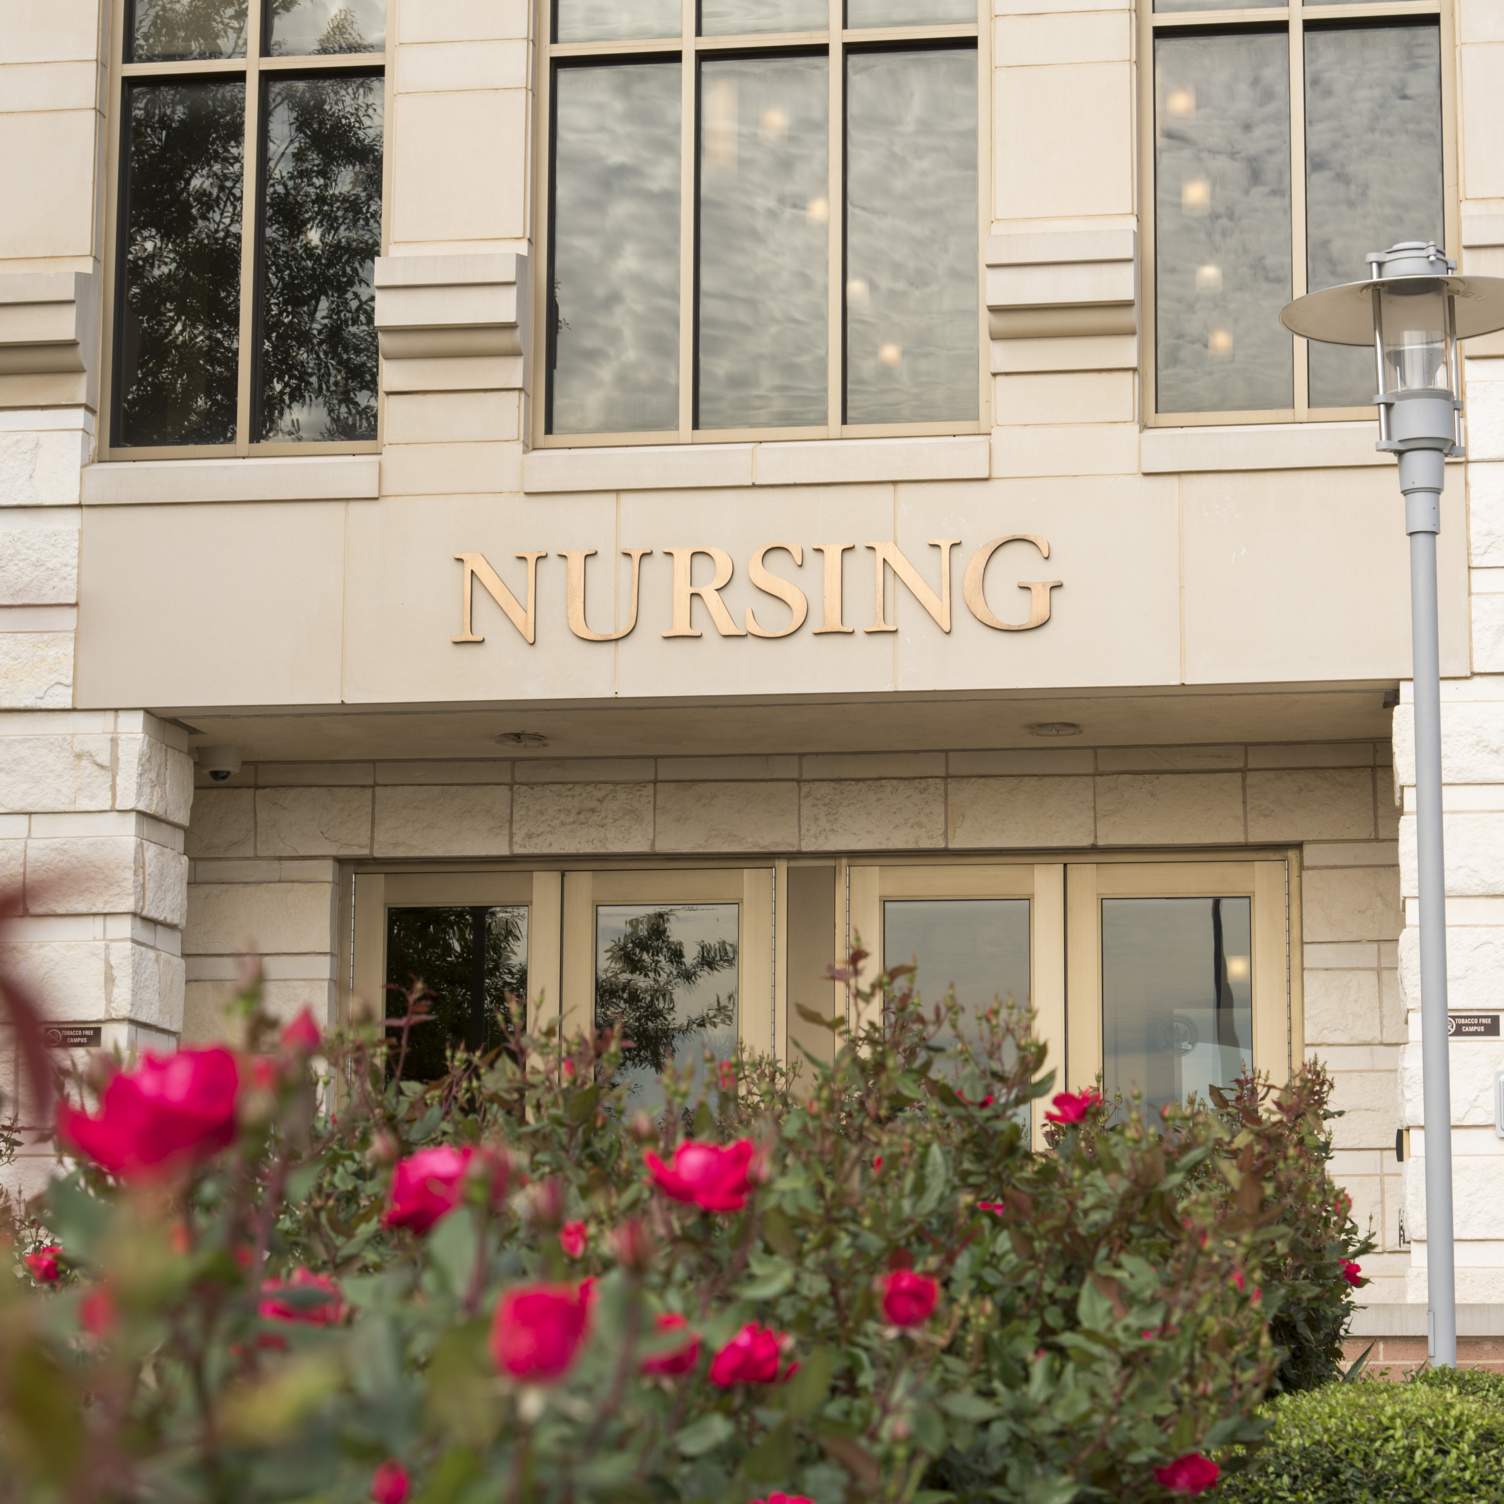 a close up of a round rock building that says "nursing" with red flowers in the landscaping